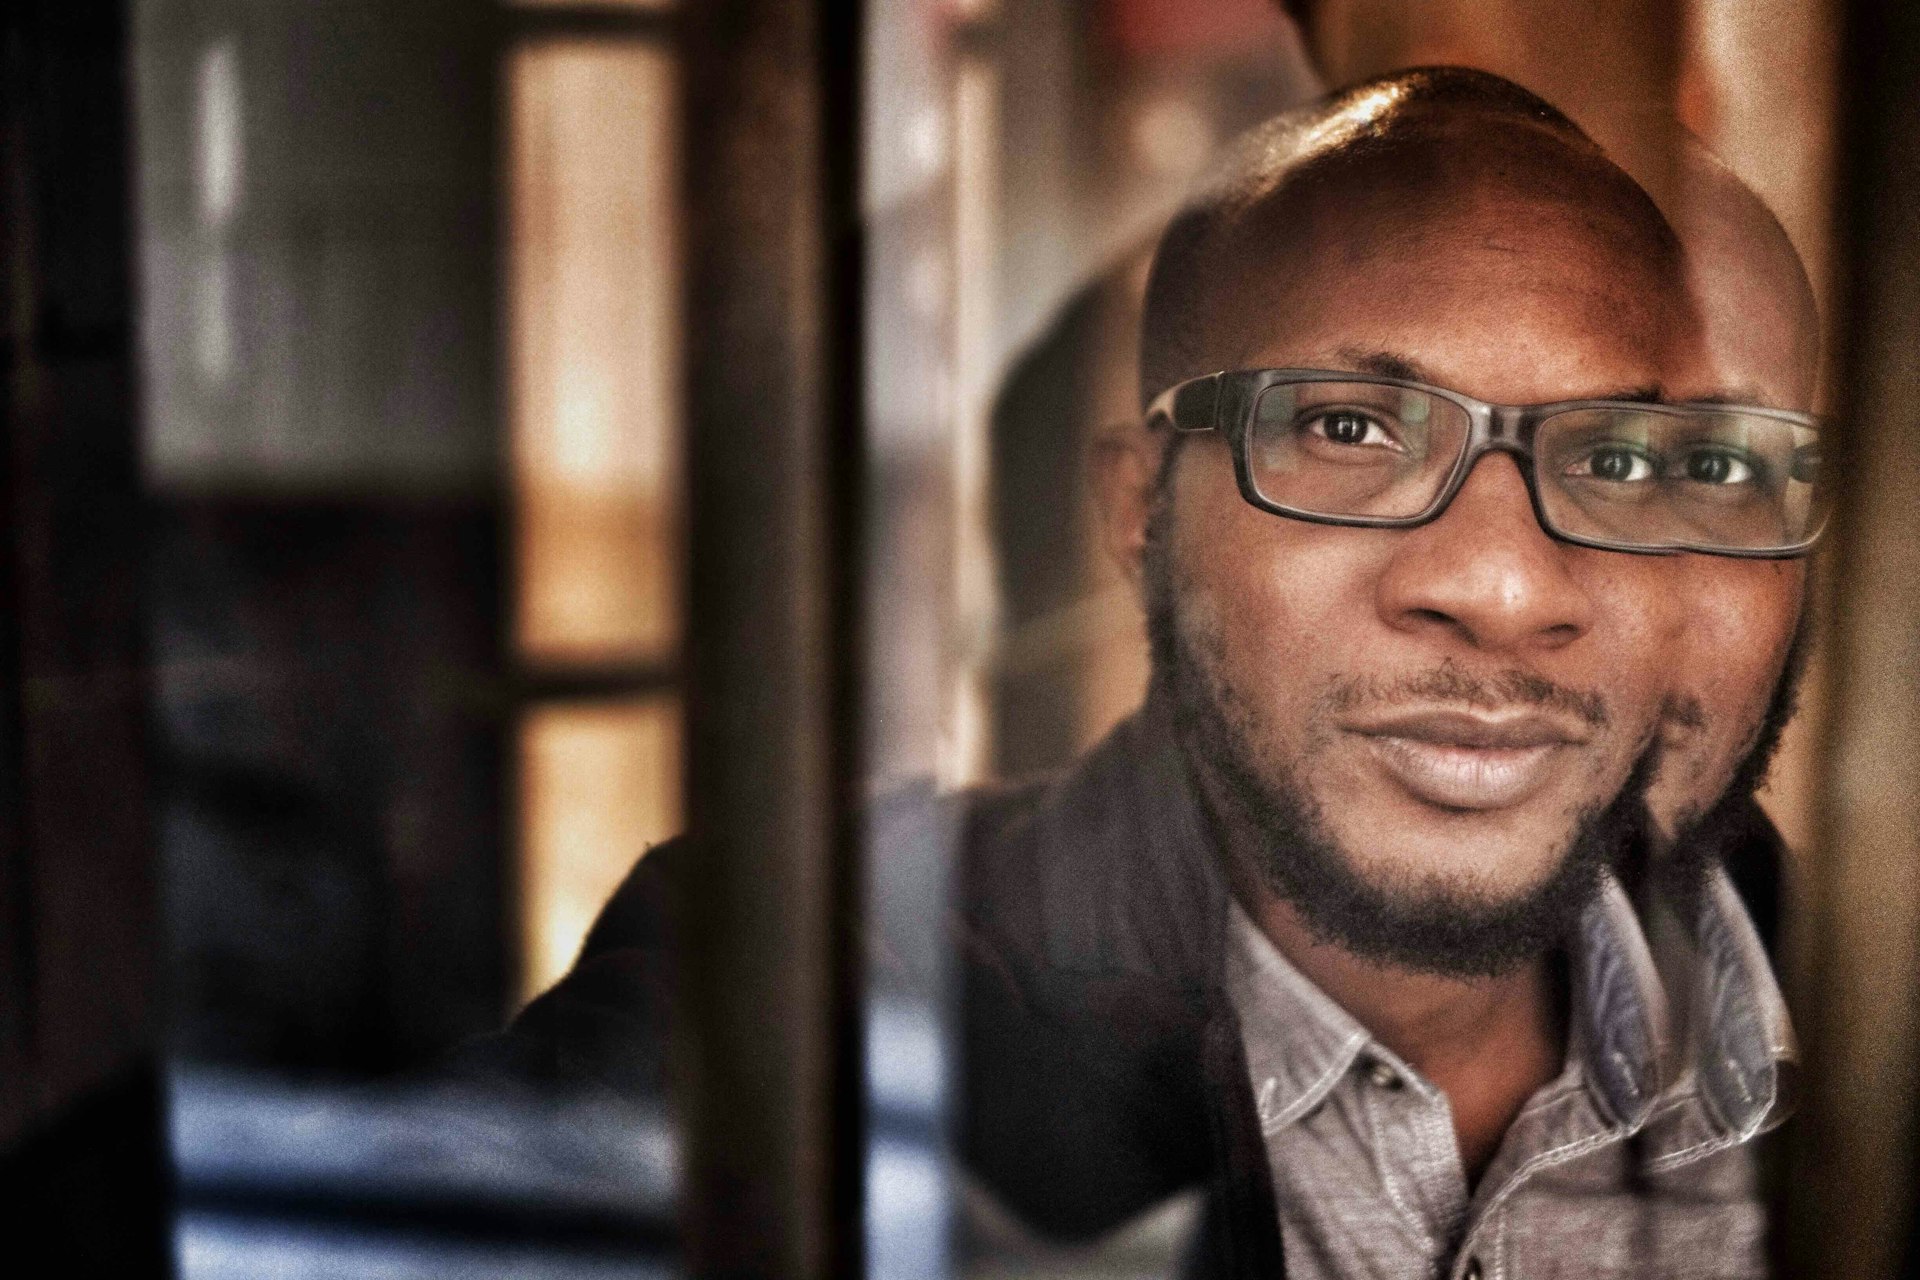 Black On All Sides: Five lessons we learned from Teju Cole